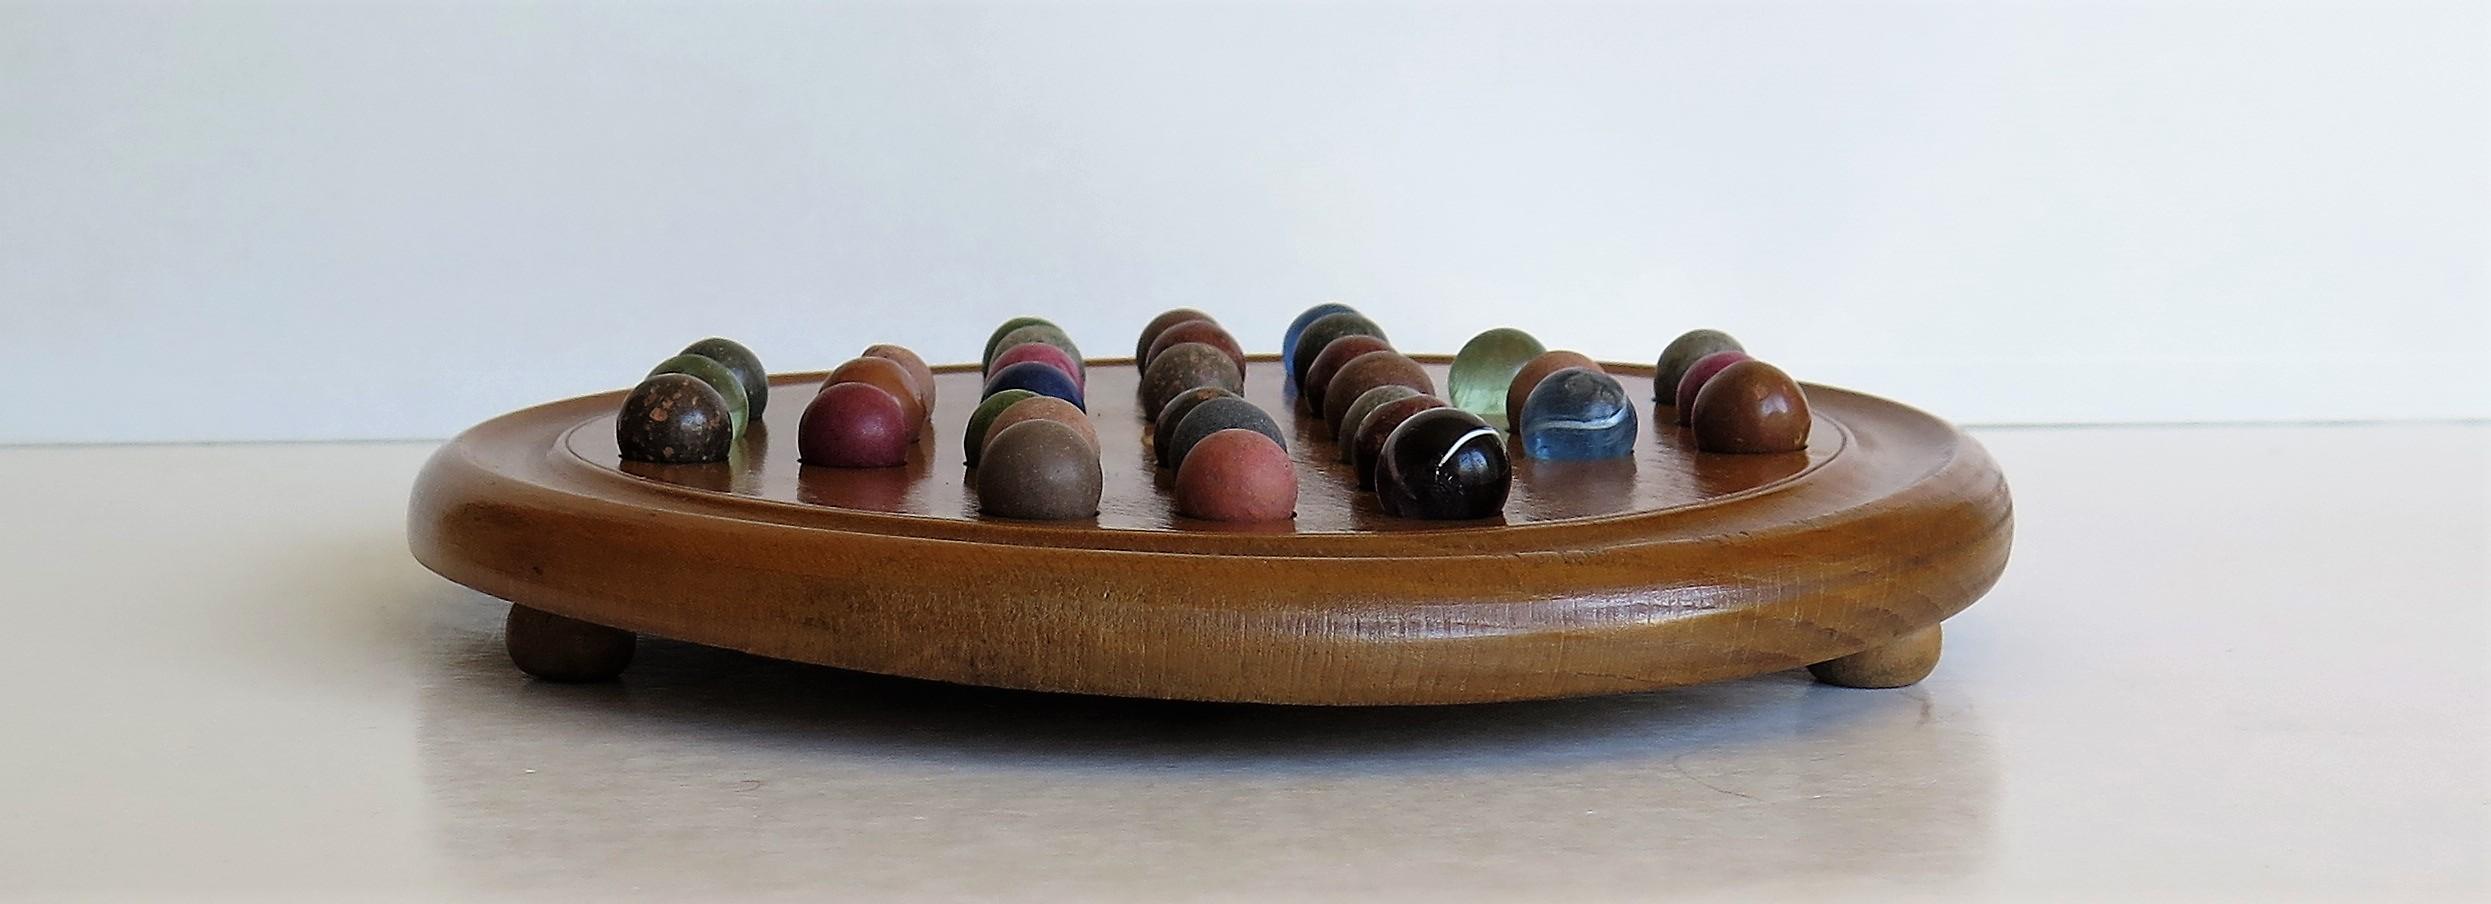 Victorian 19th Century Marble Solitaire Board Game, with 32 Handmade Marbles, circa 1880